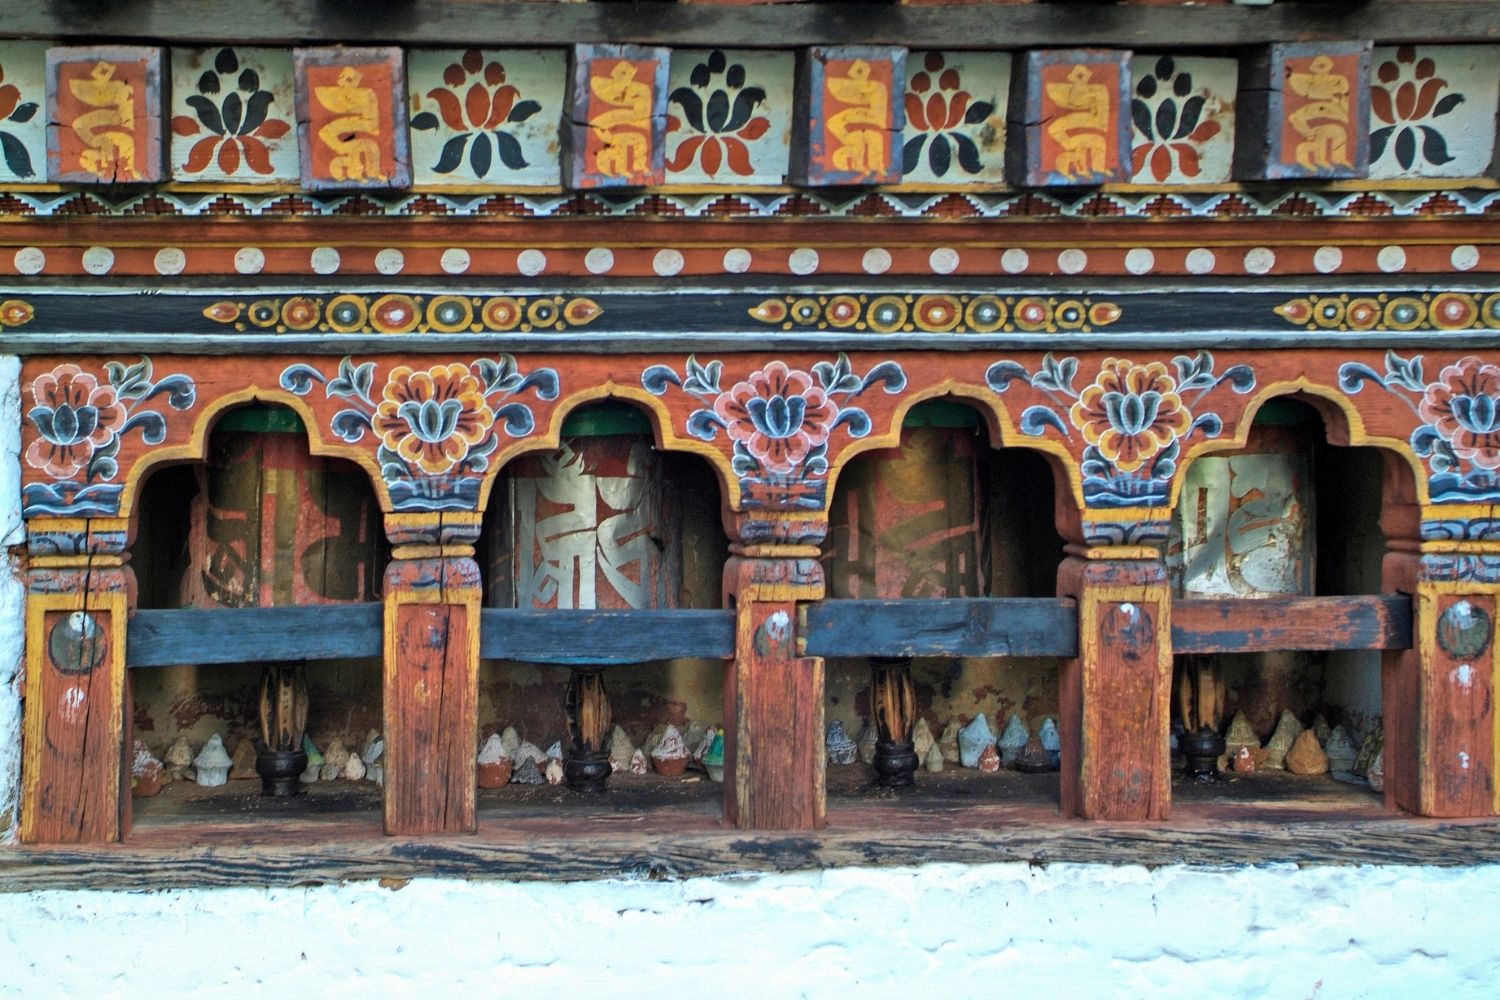 Bhutan Culture and Customs » All you need to know Bhutan Culture